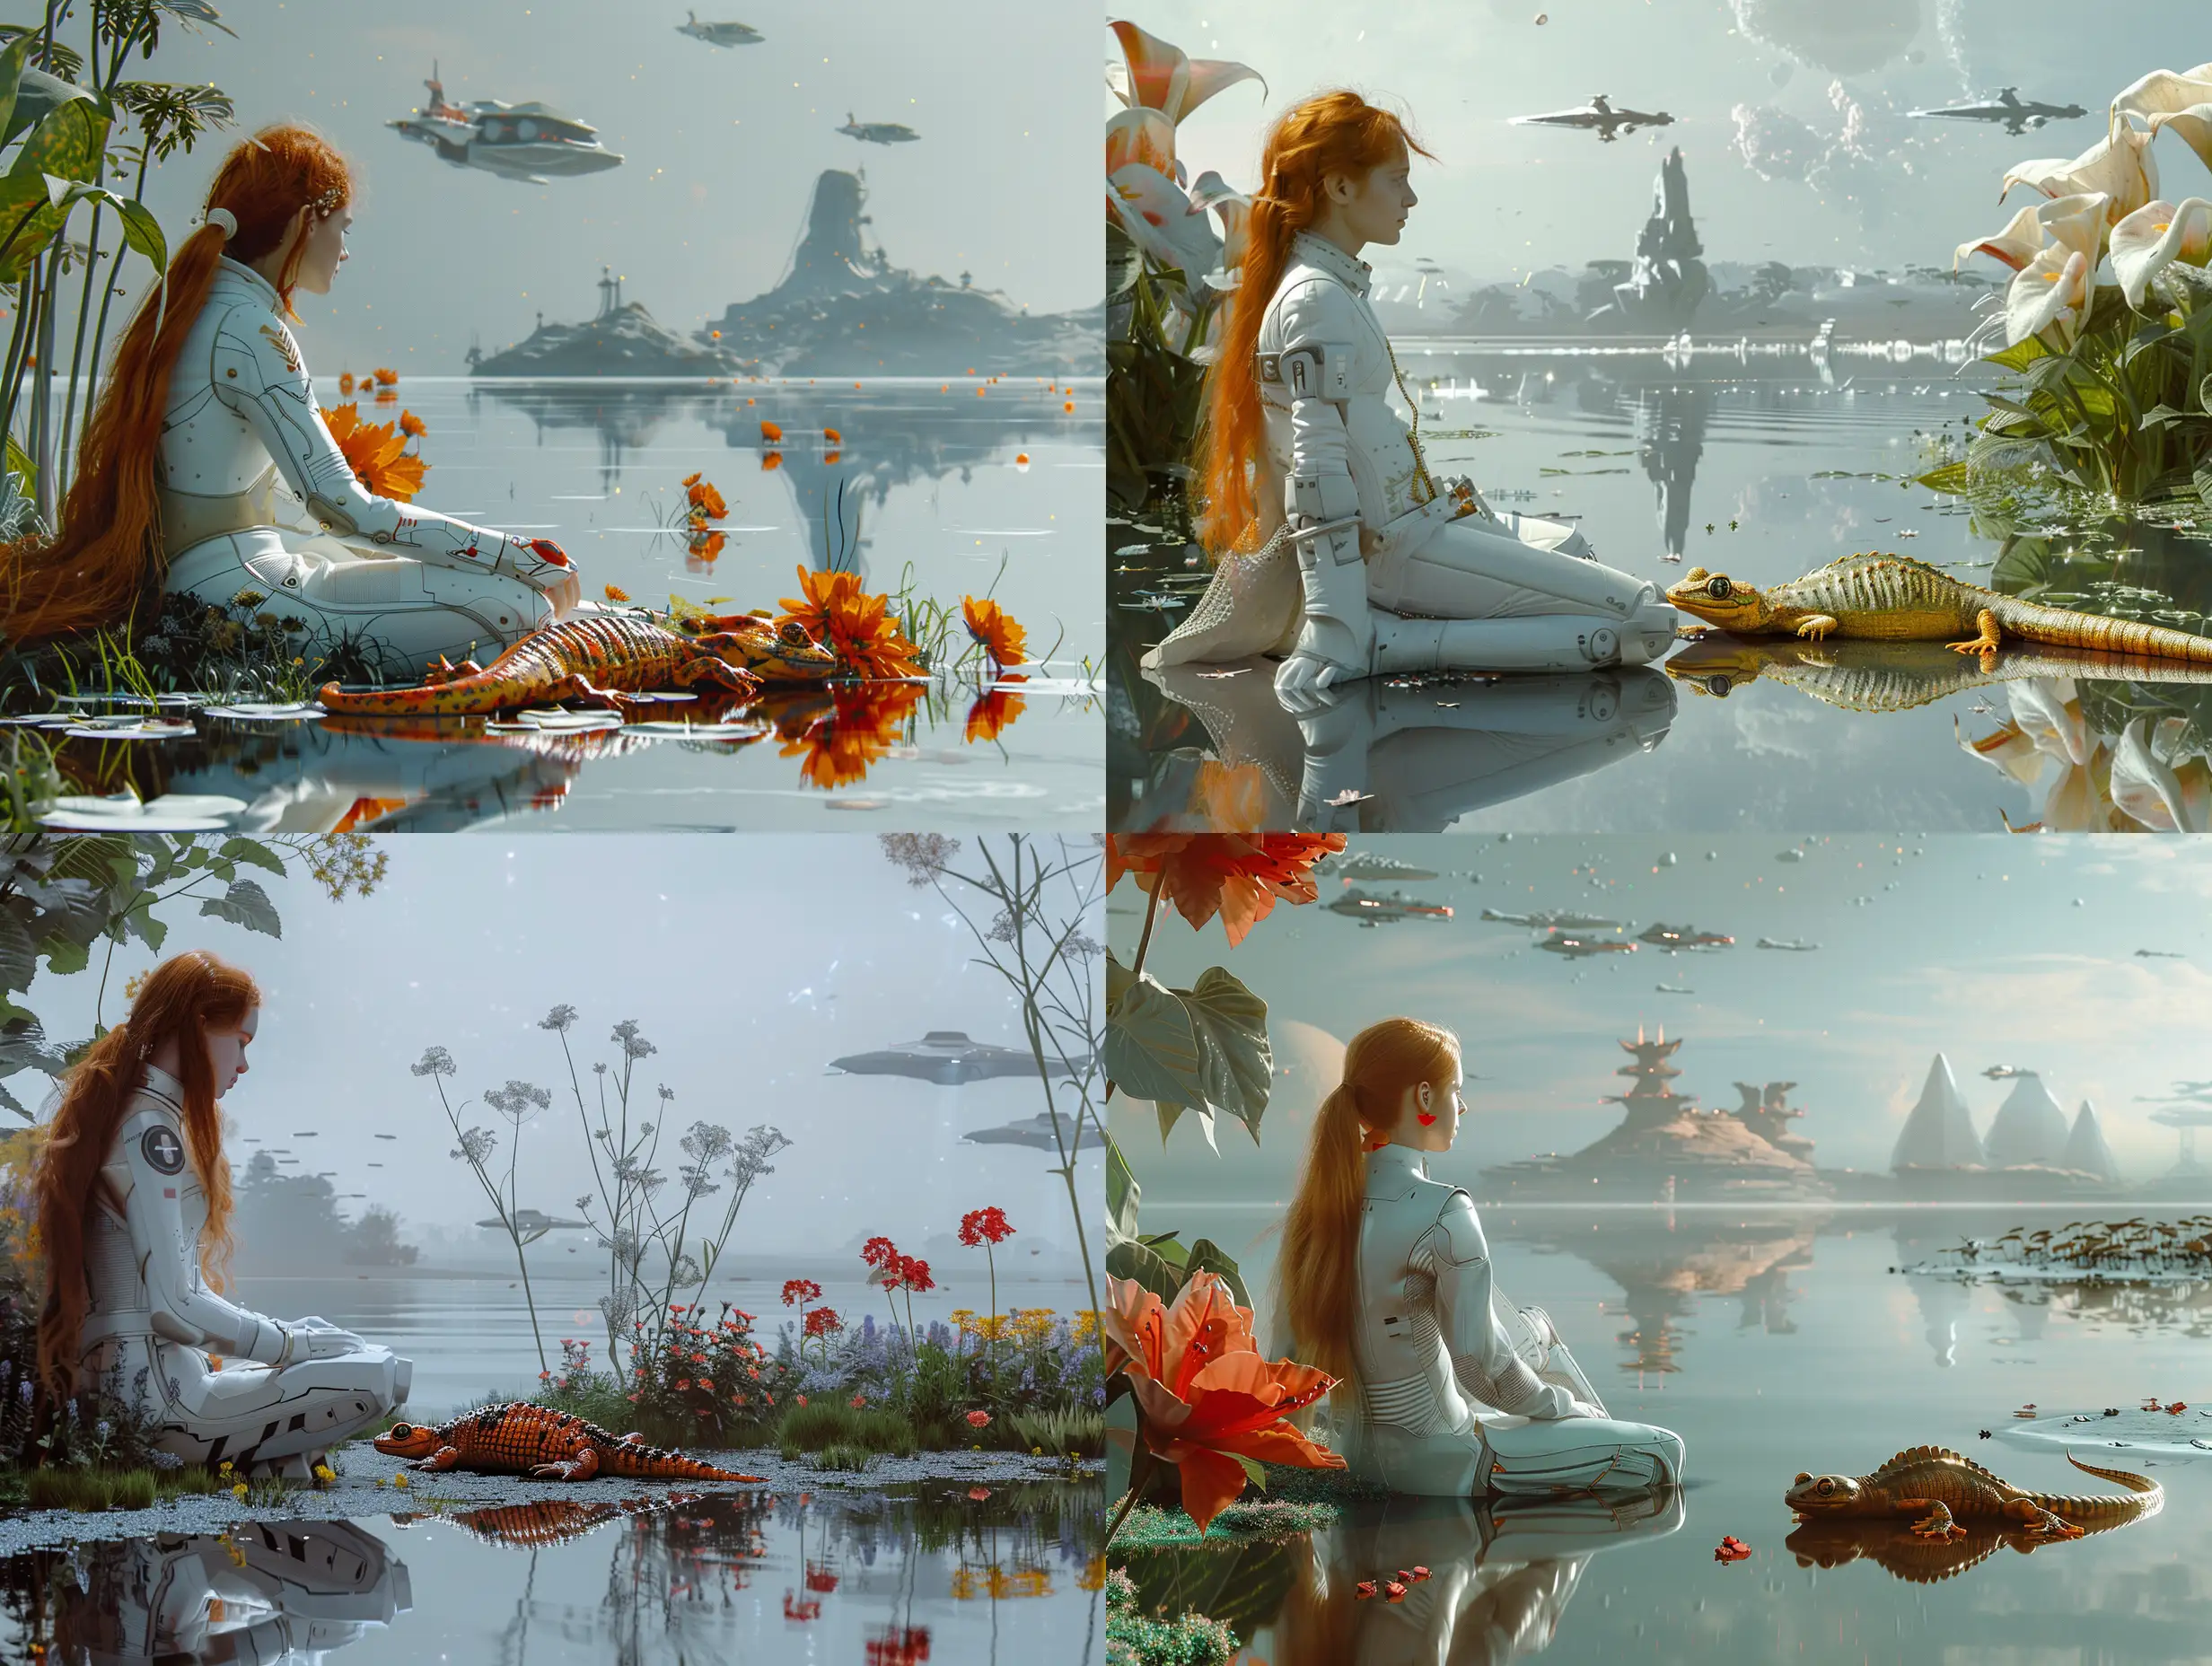 SciFi-Landscape-Girl-in-White-Space-Suit-by-Lake-with-Fantastic-Salamander-and-Space-Ships